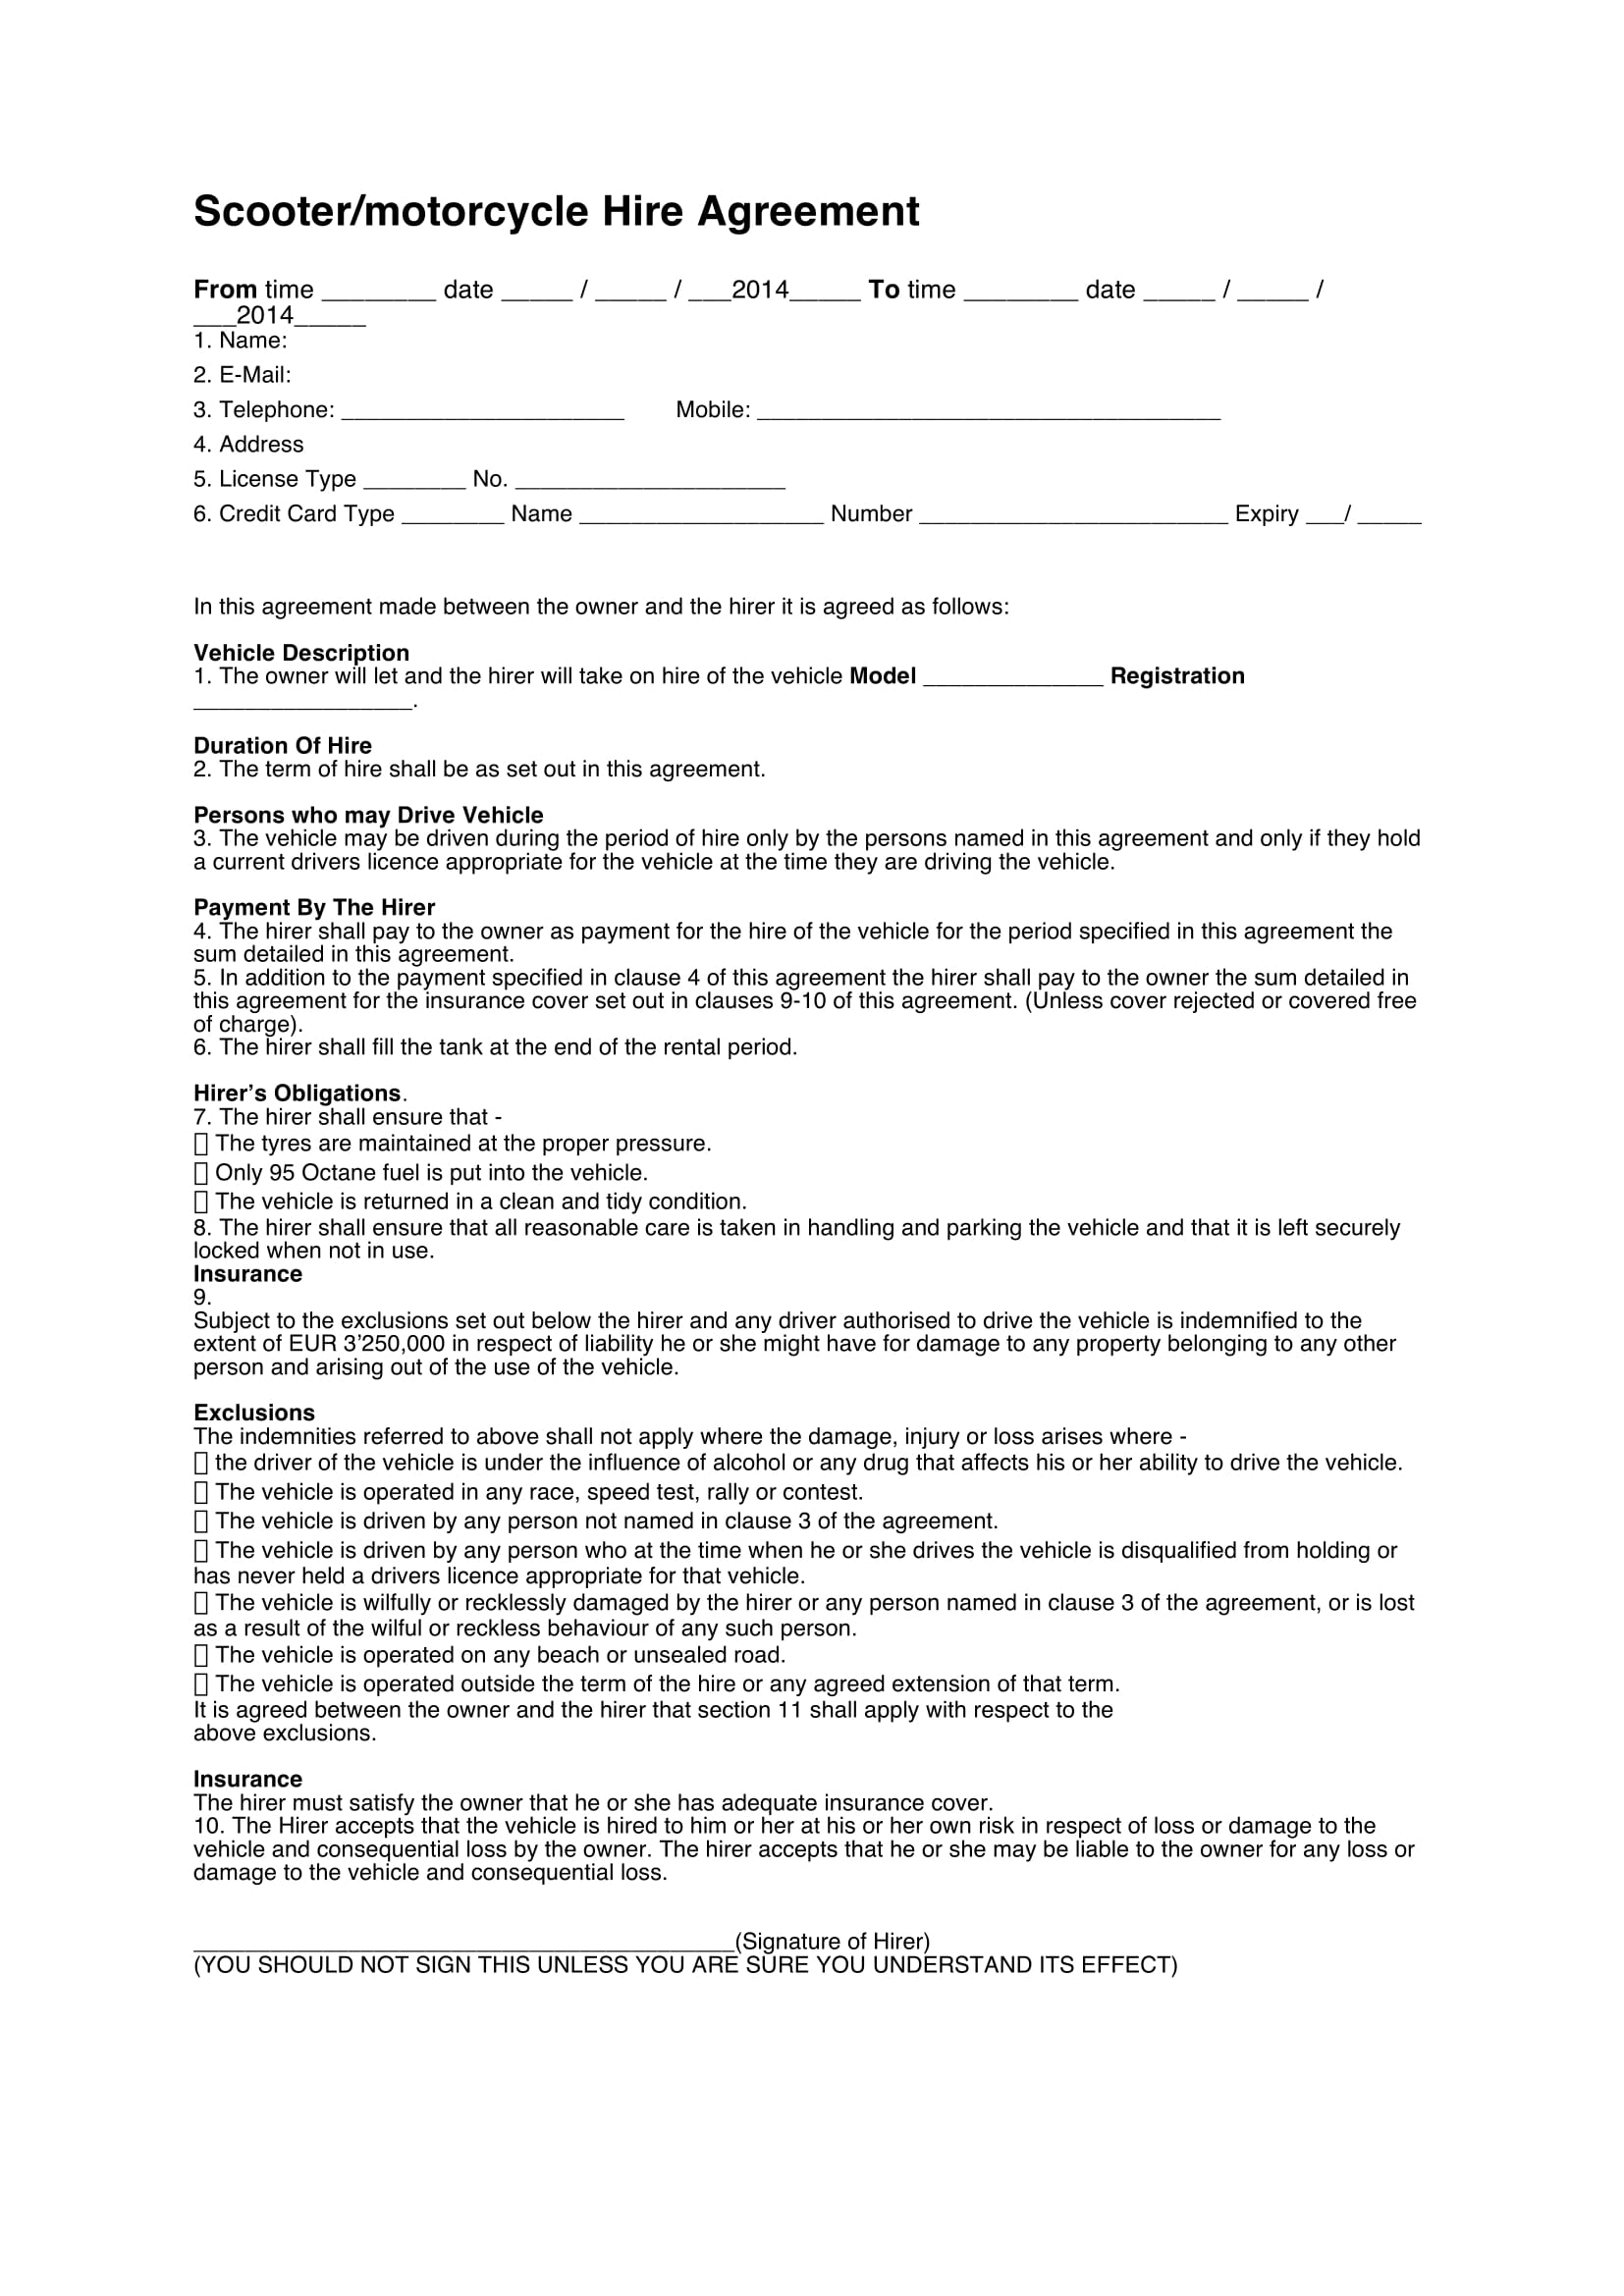 motorcycle hire agreement contract form 1